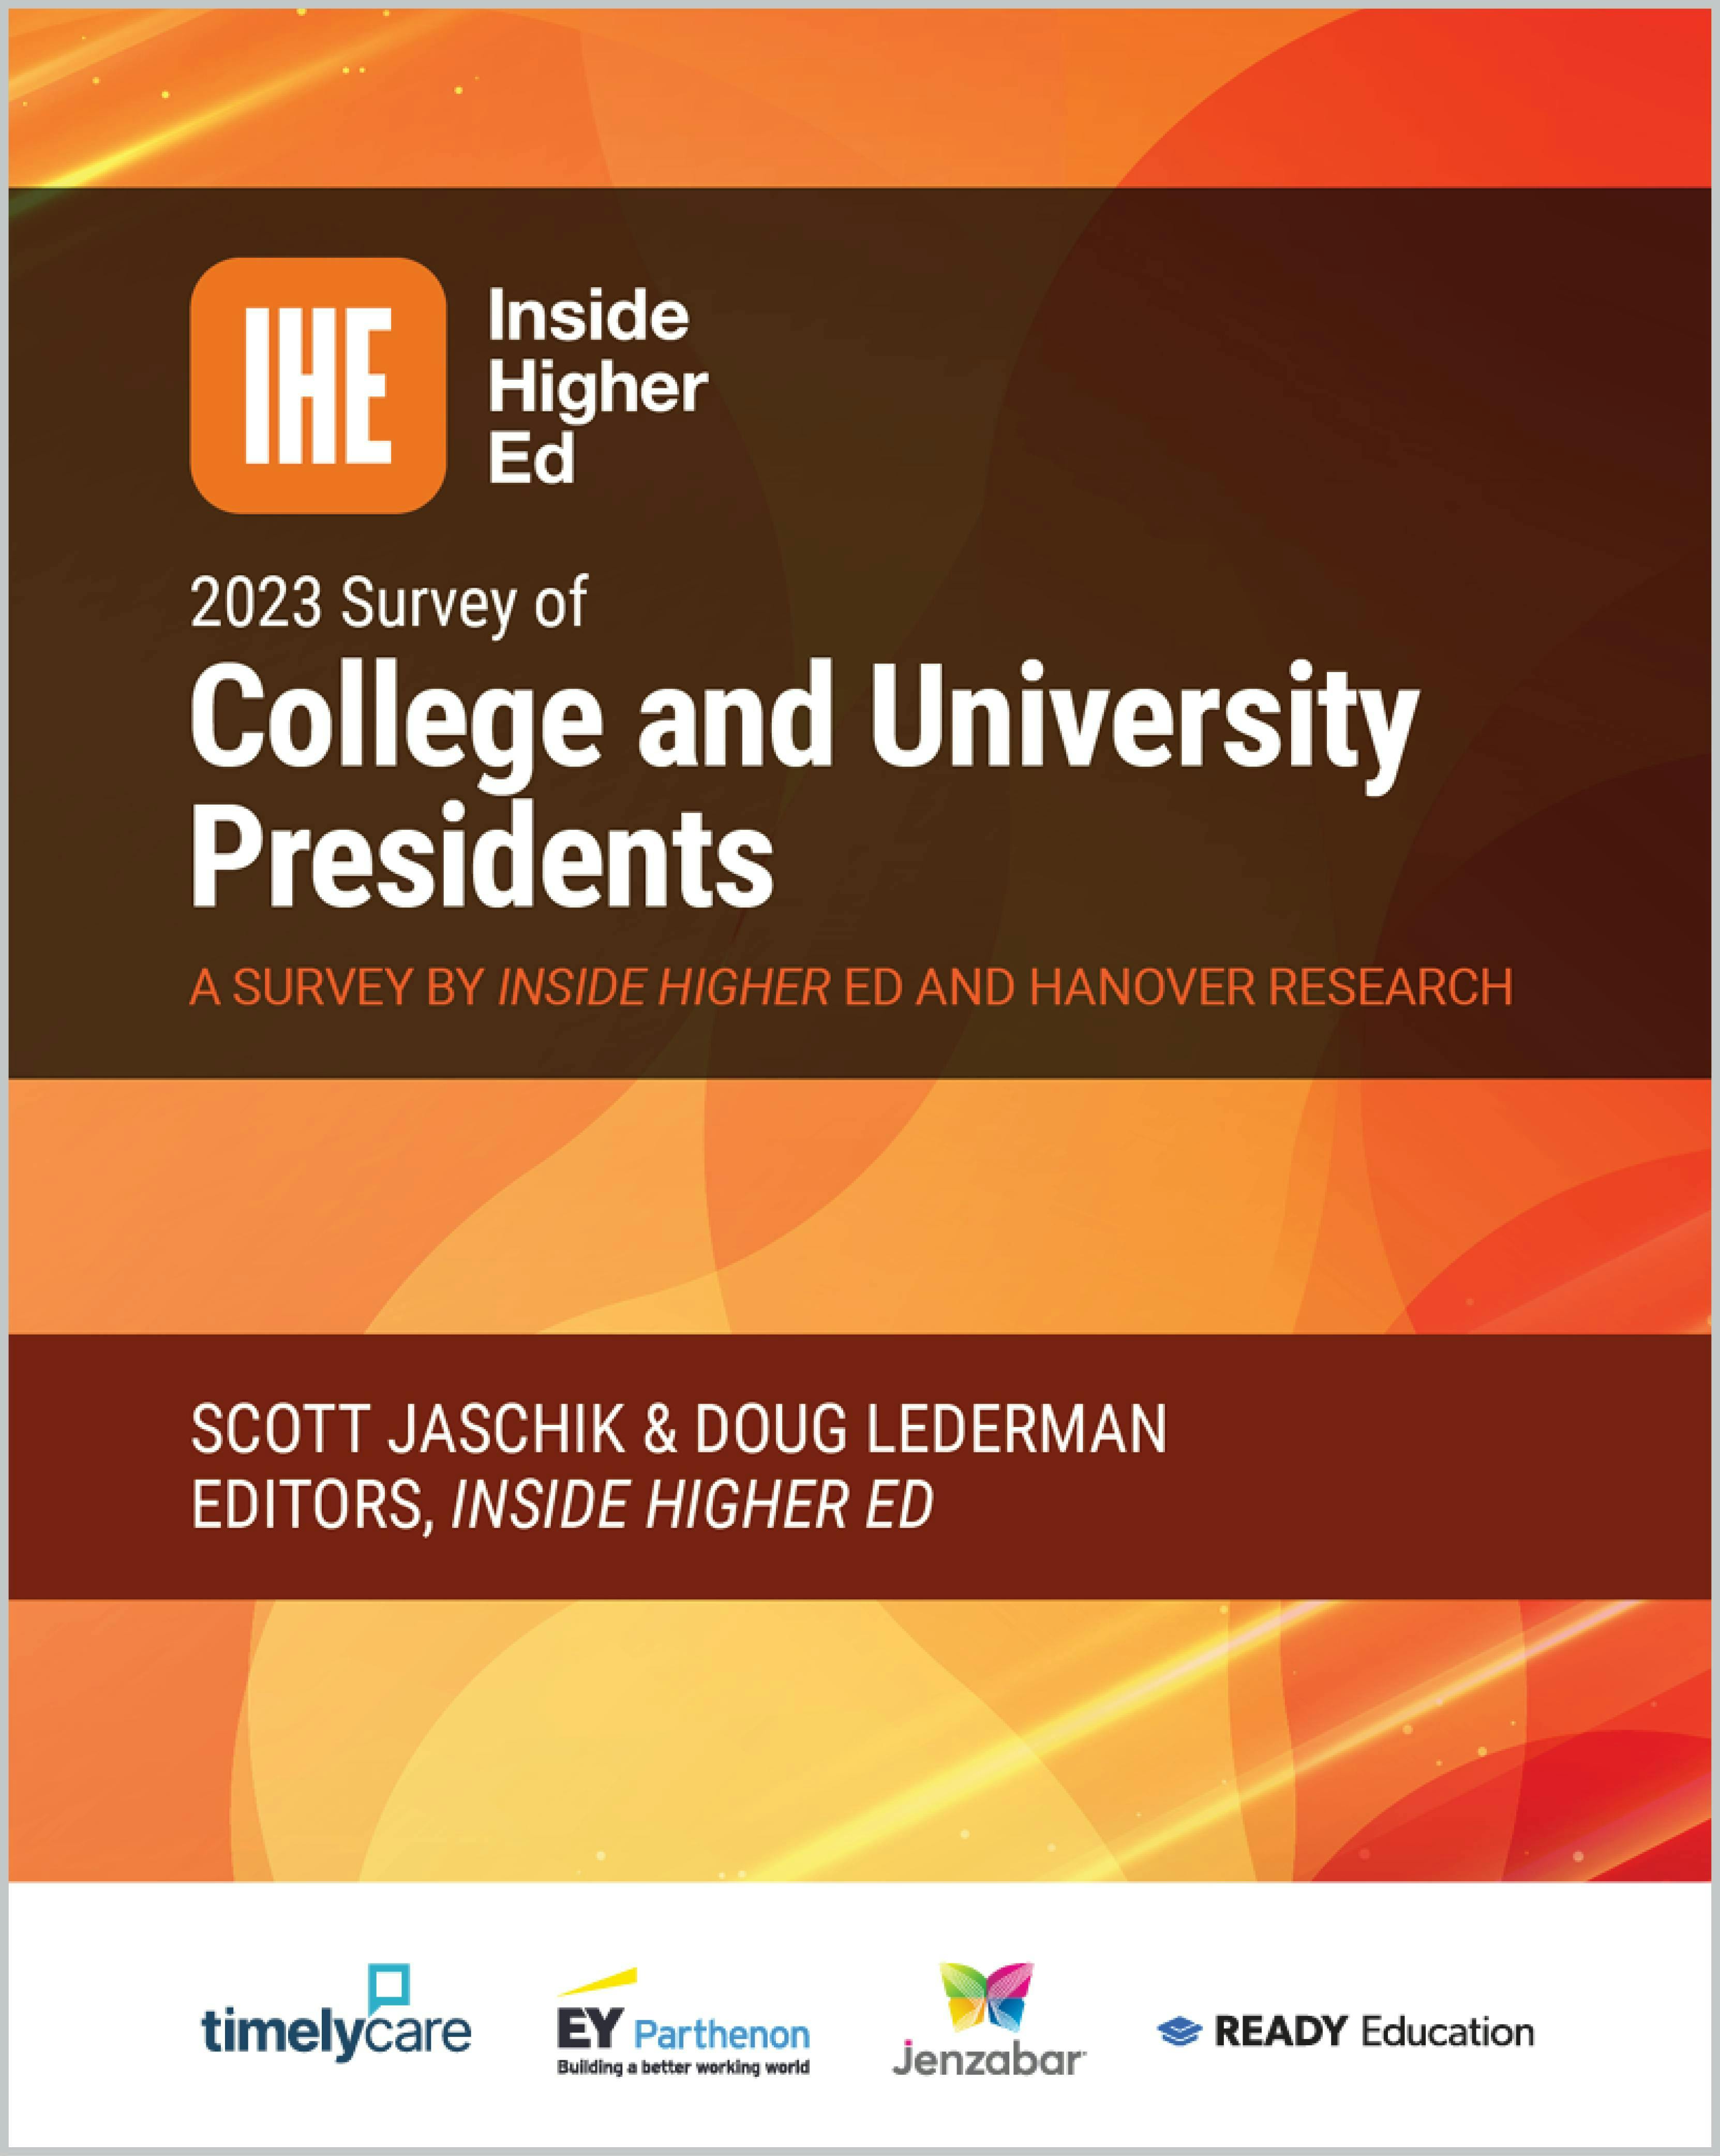 IHE 2023 Survey of College and University Presidents